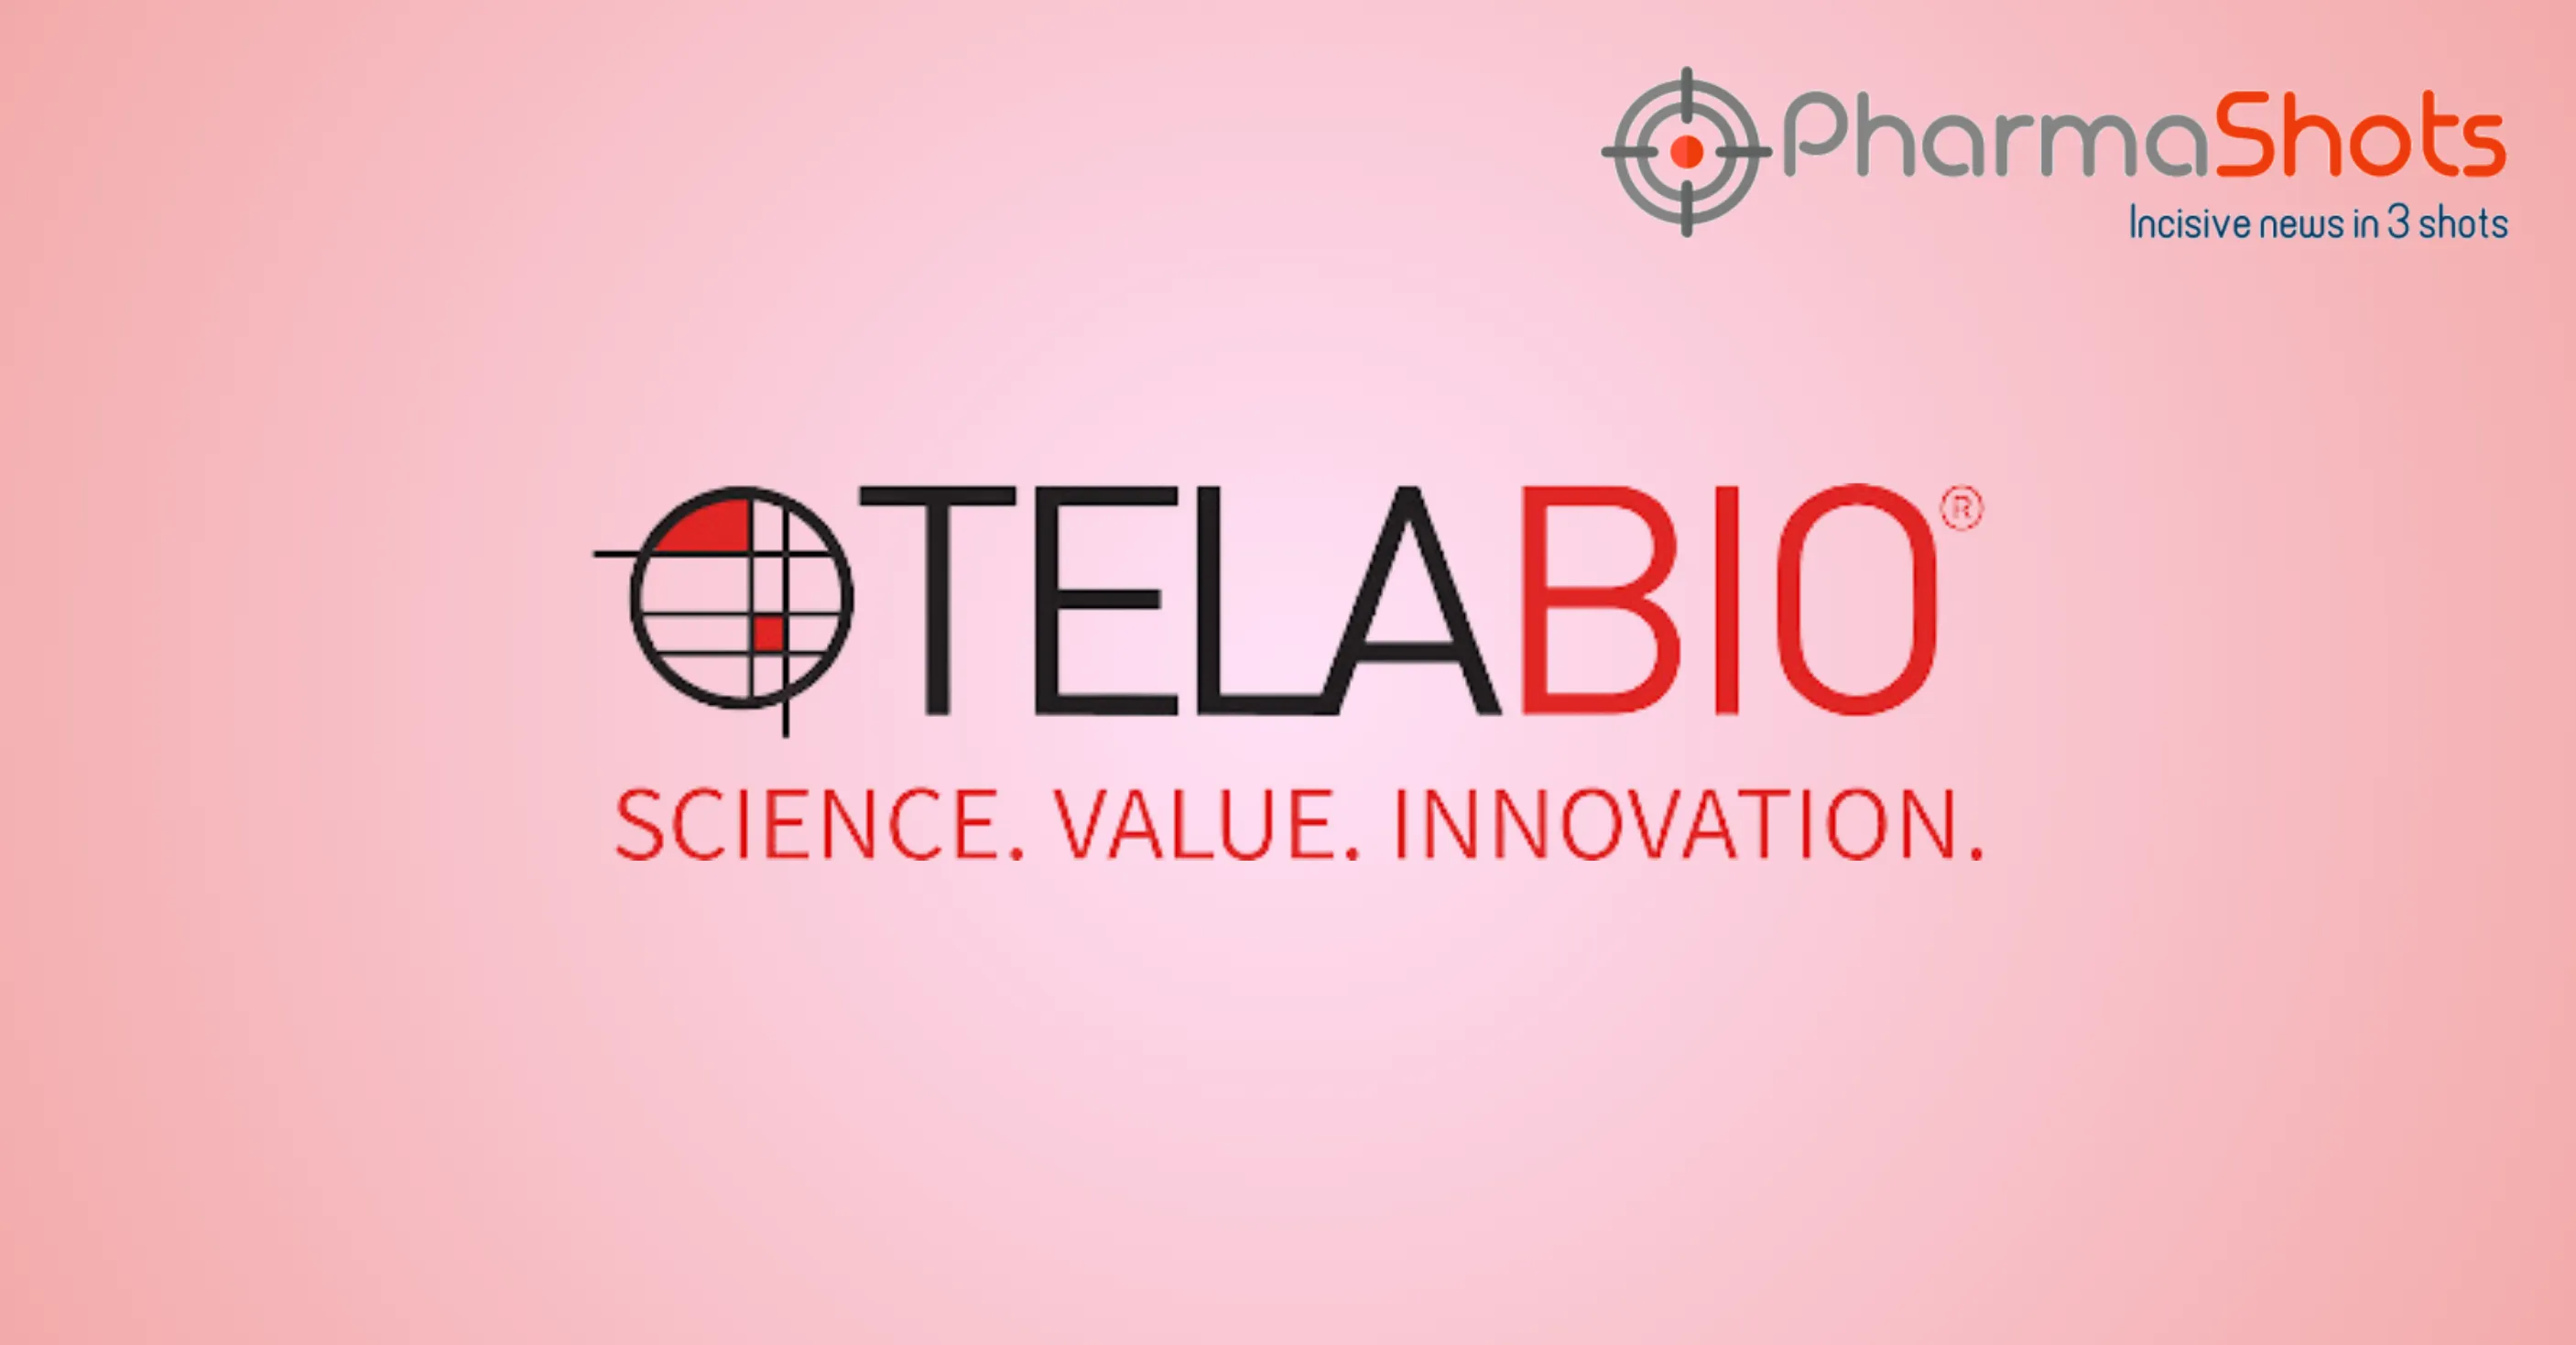 TELA Bio Introduces LIQUIFIX for Internal Use in Hernia Surgery Across the US